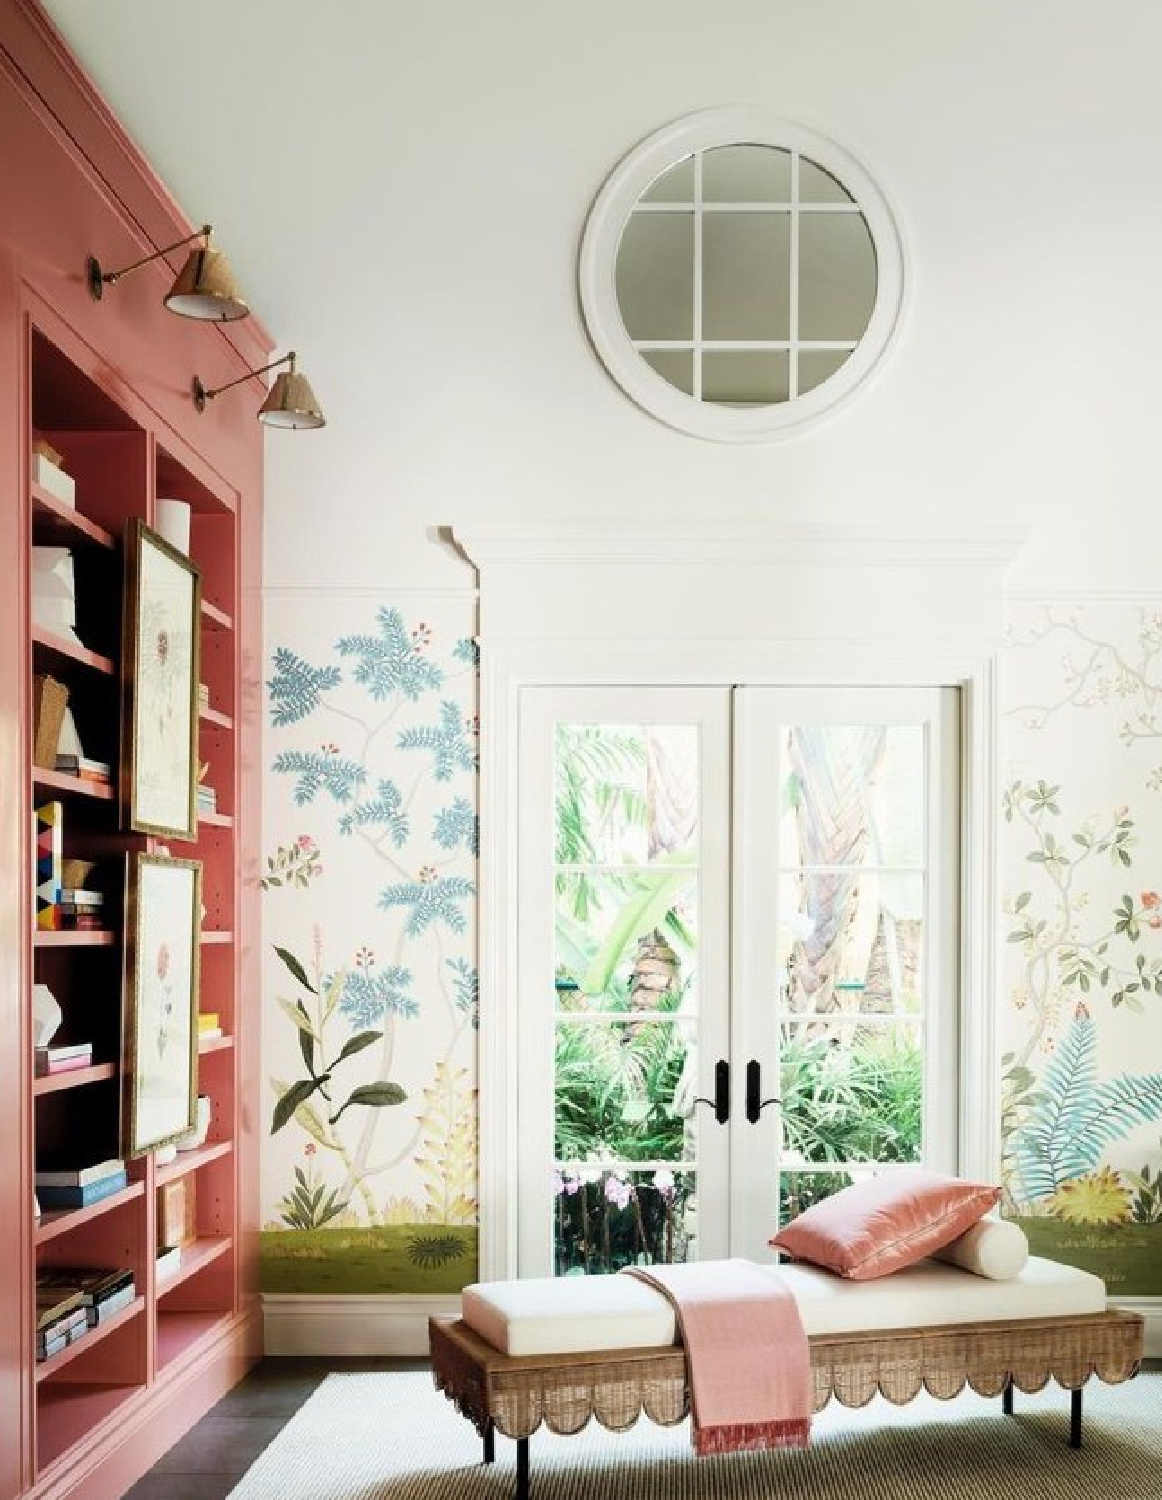 Suzanne Kasler designed interior with bold salmon pink builtins (Custis Salmon by Benjamin Moore) for 2020 Kips Bay Showhouse - photo by Douglas Friedman. #custissalmon #pinkinteriors #suzannekasler